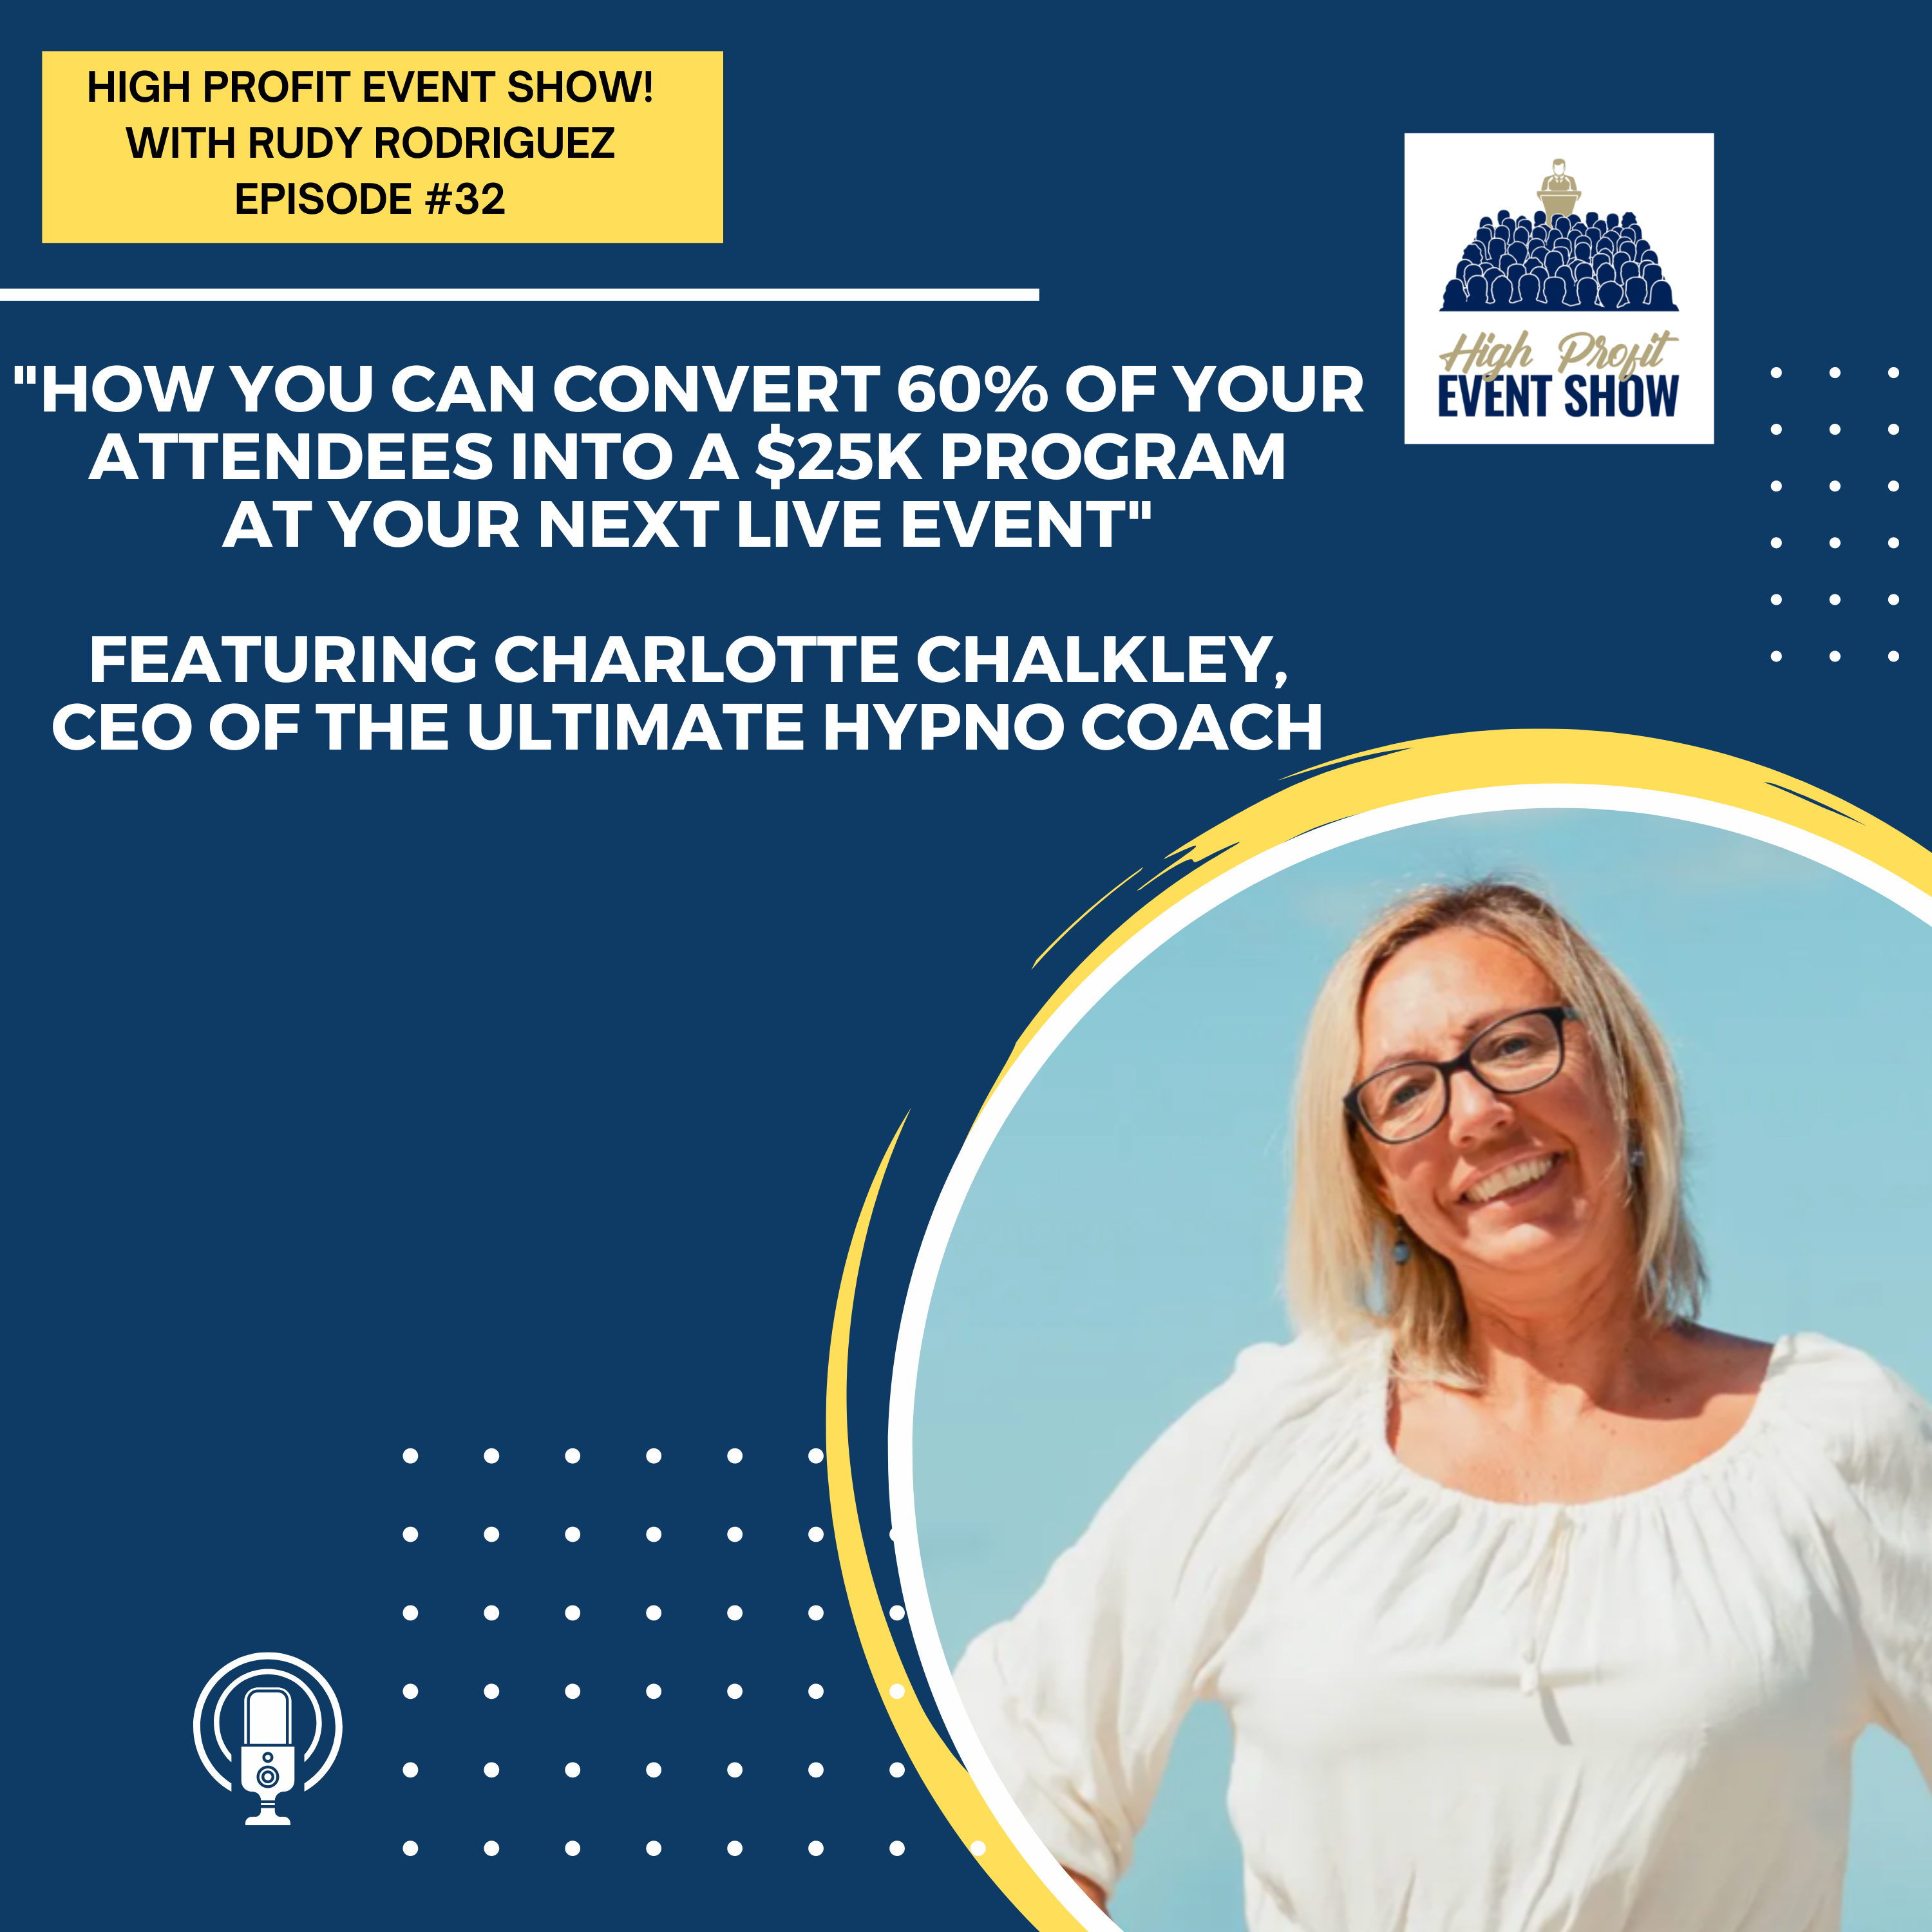 Episode 32: How You Can Convert 60% of Your Attendees Into a $25k Program at Your Next Live Event with Charlotte Chalkley!